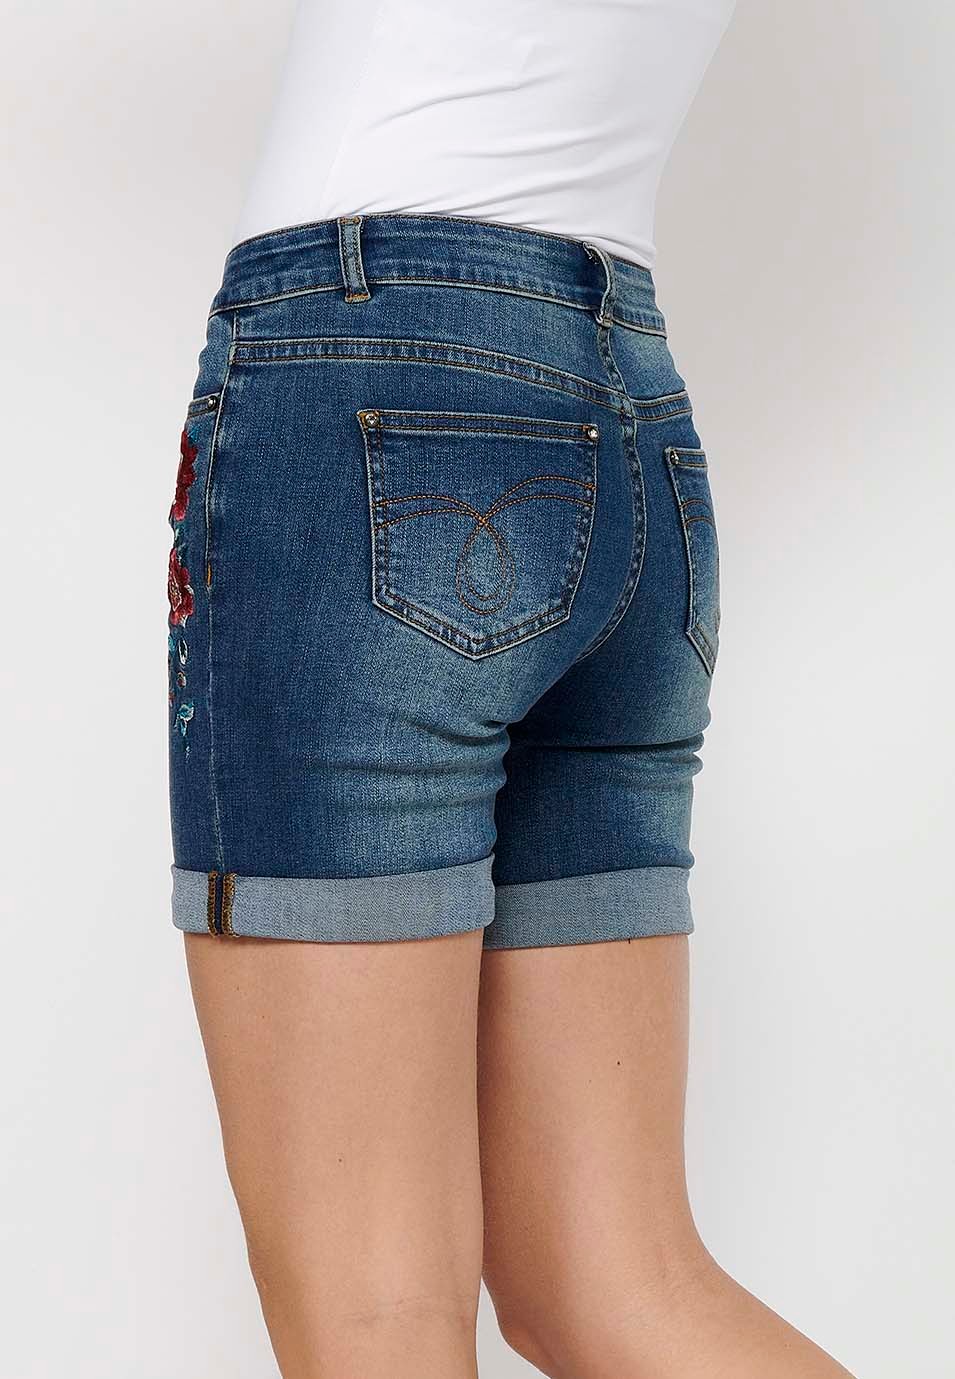 Denim shorts with front zipper and button closure and front floral embroidered details with five pockets, one pocket pocket, Dark Blue for Women 7